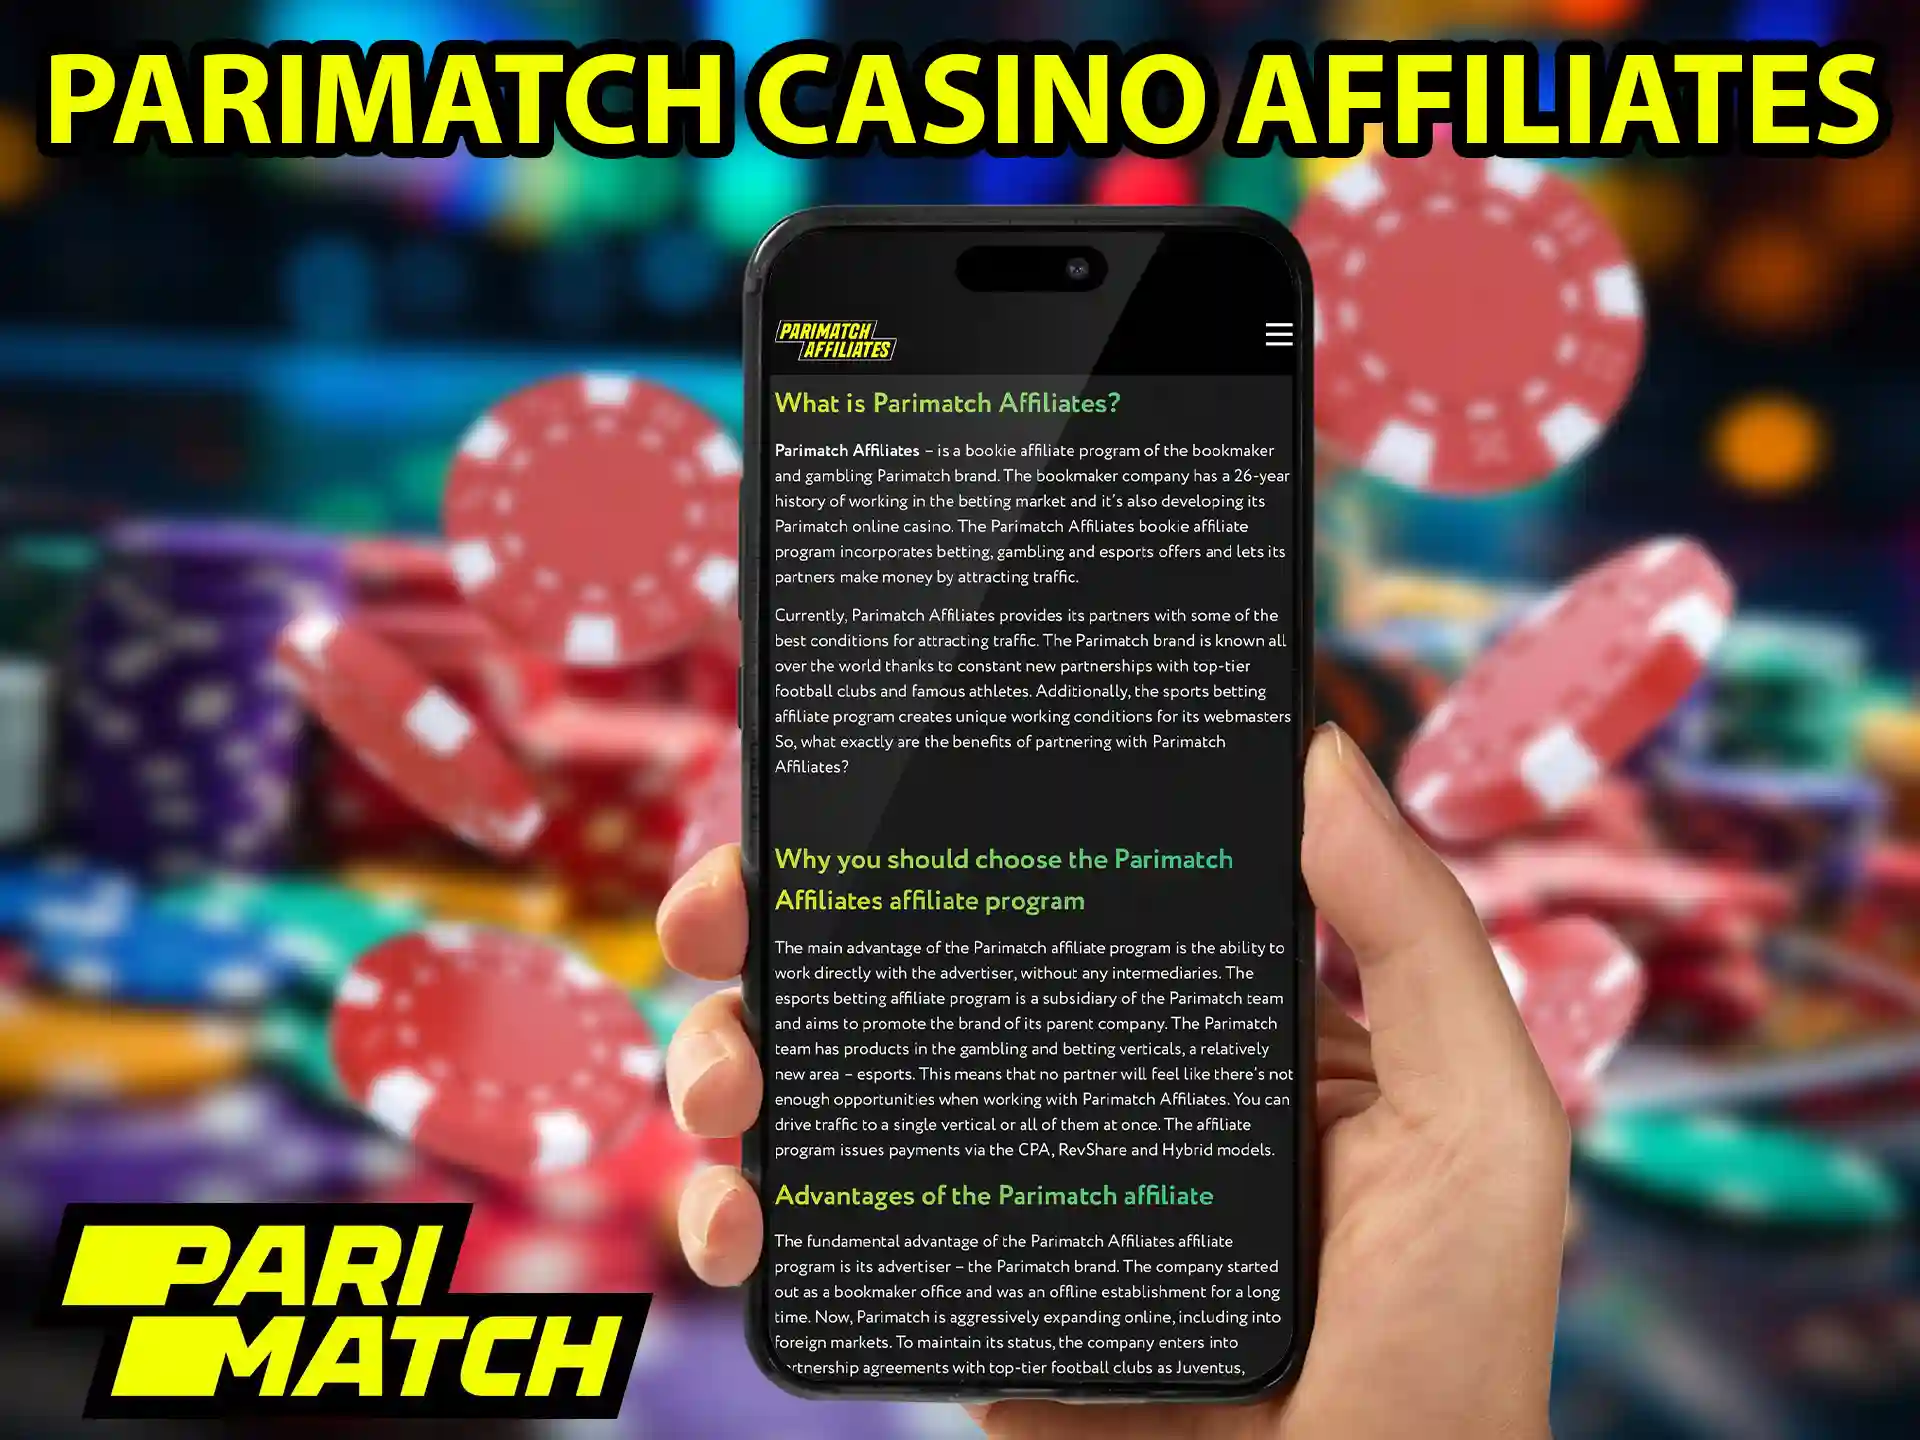 Bring new players to the Parimatch website and get rewarded within the affiliate program.